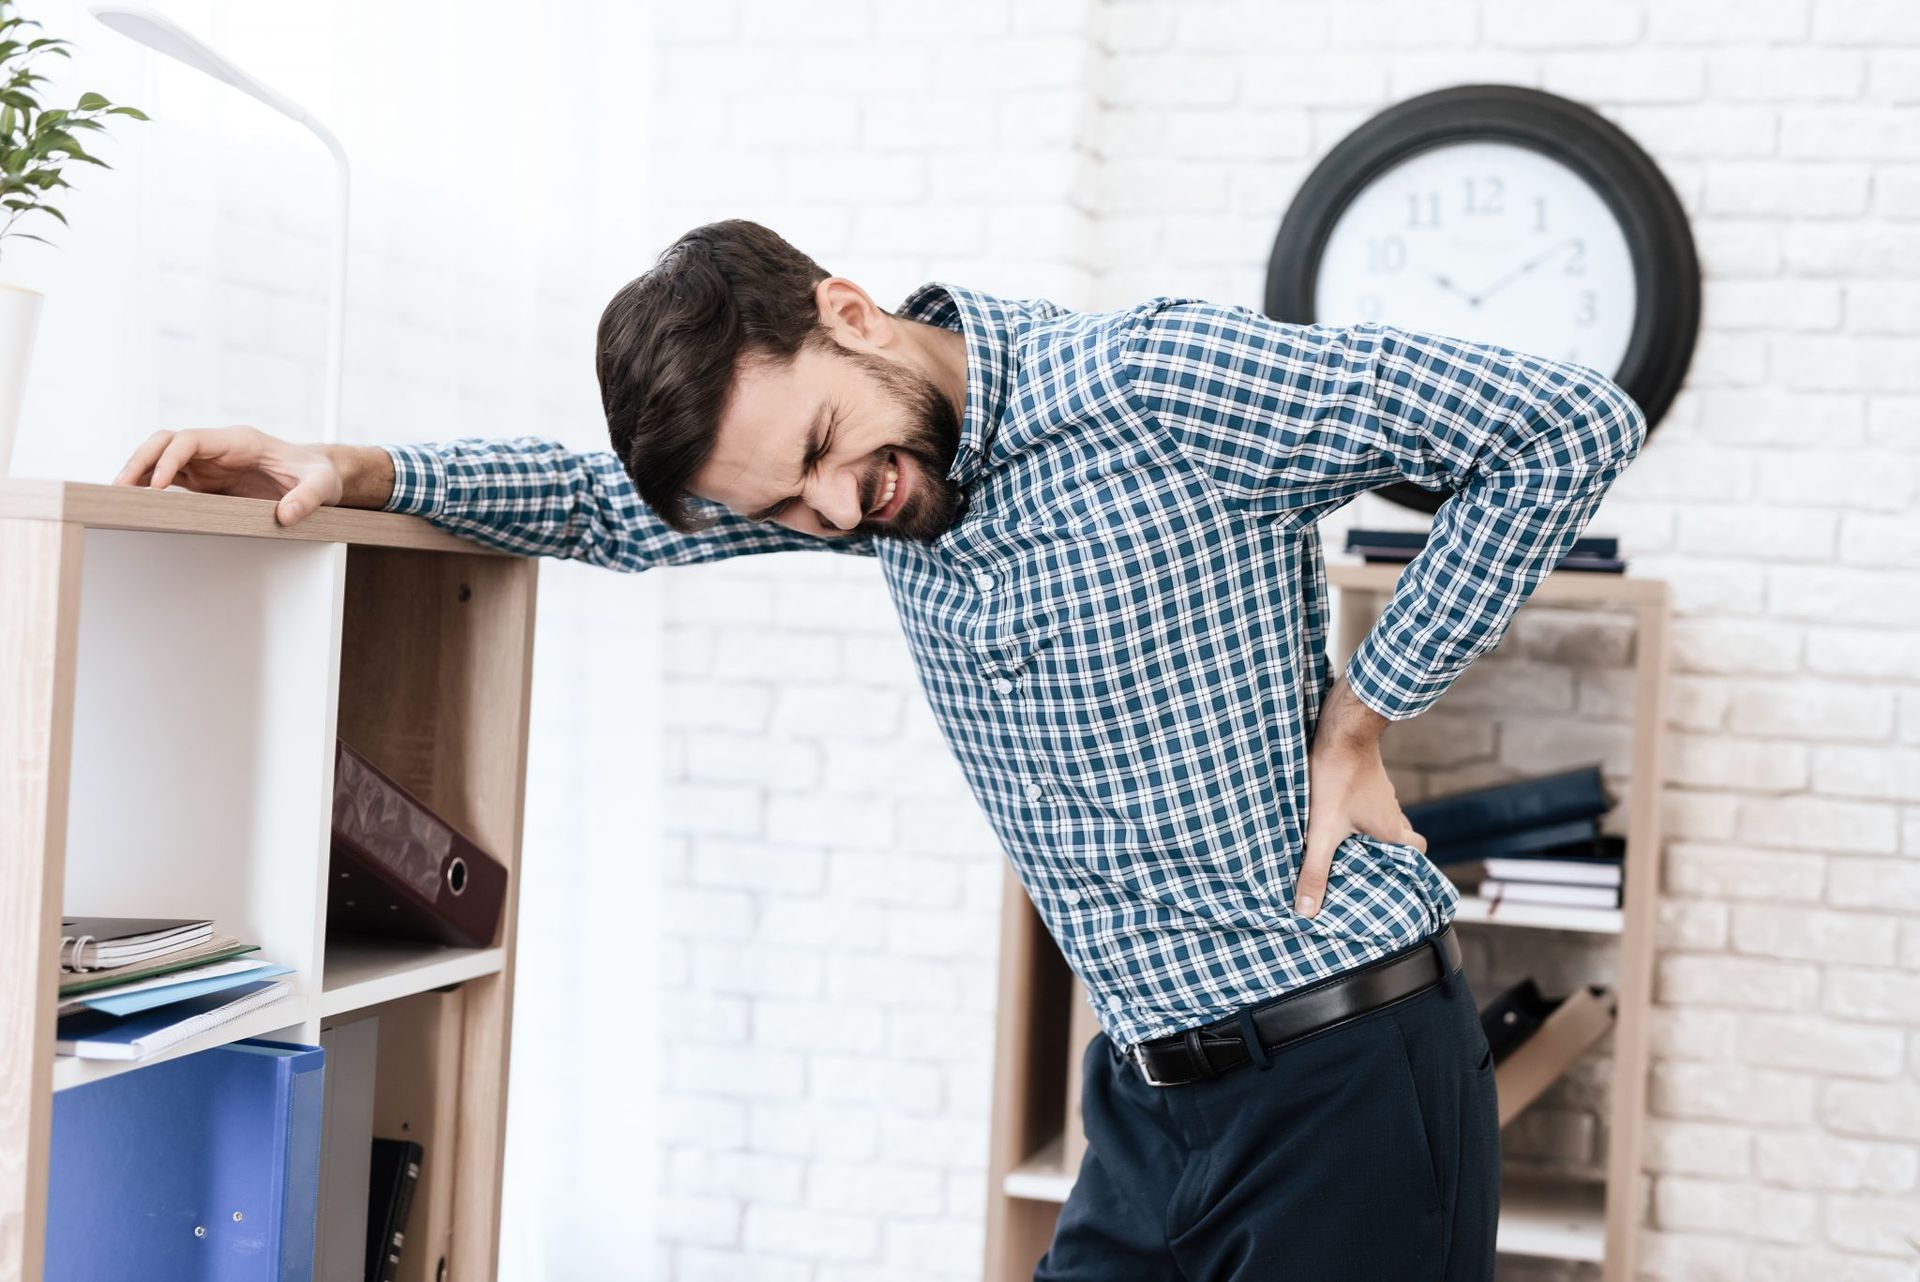 Top 10 Worst Jobs for Back Pain